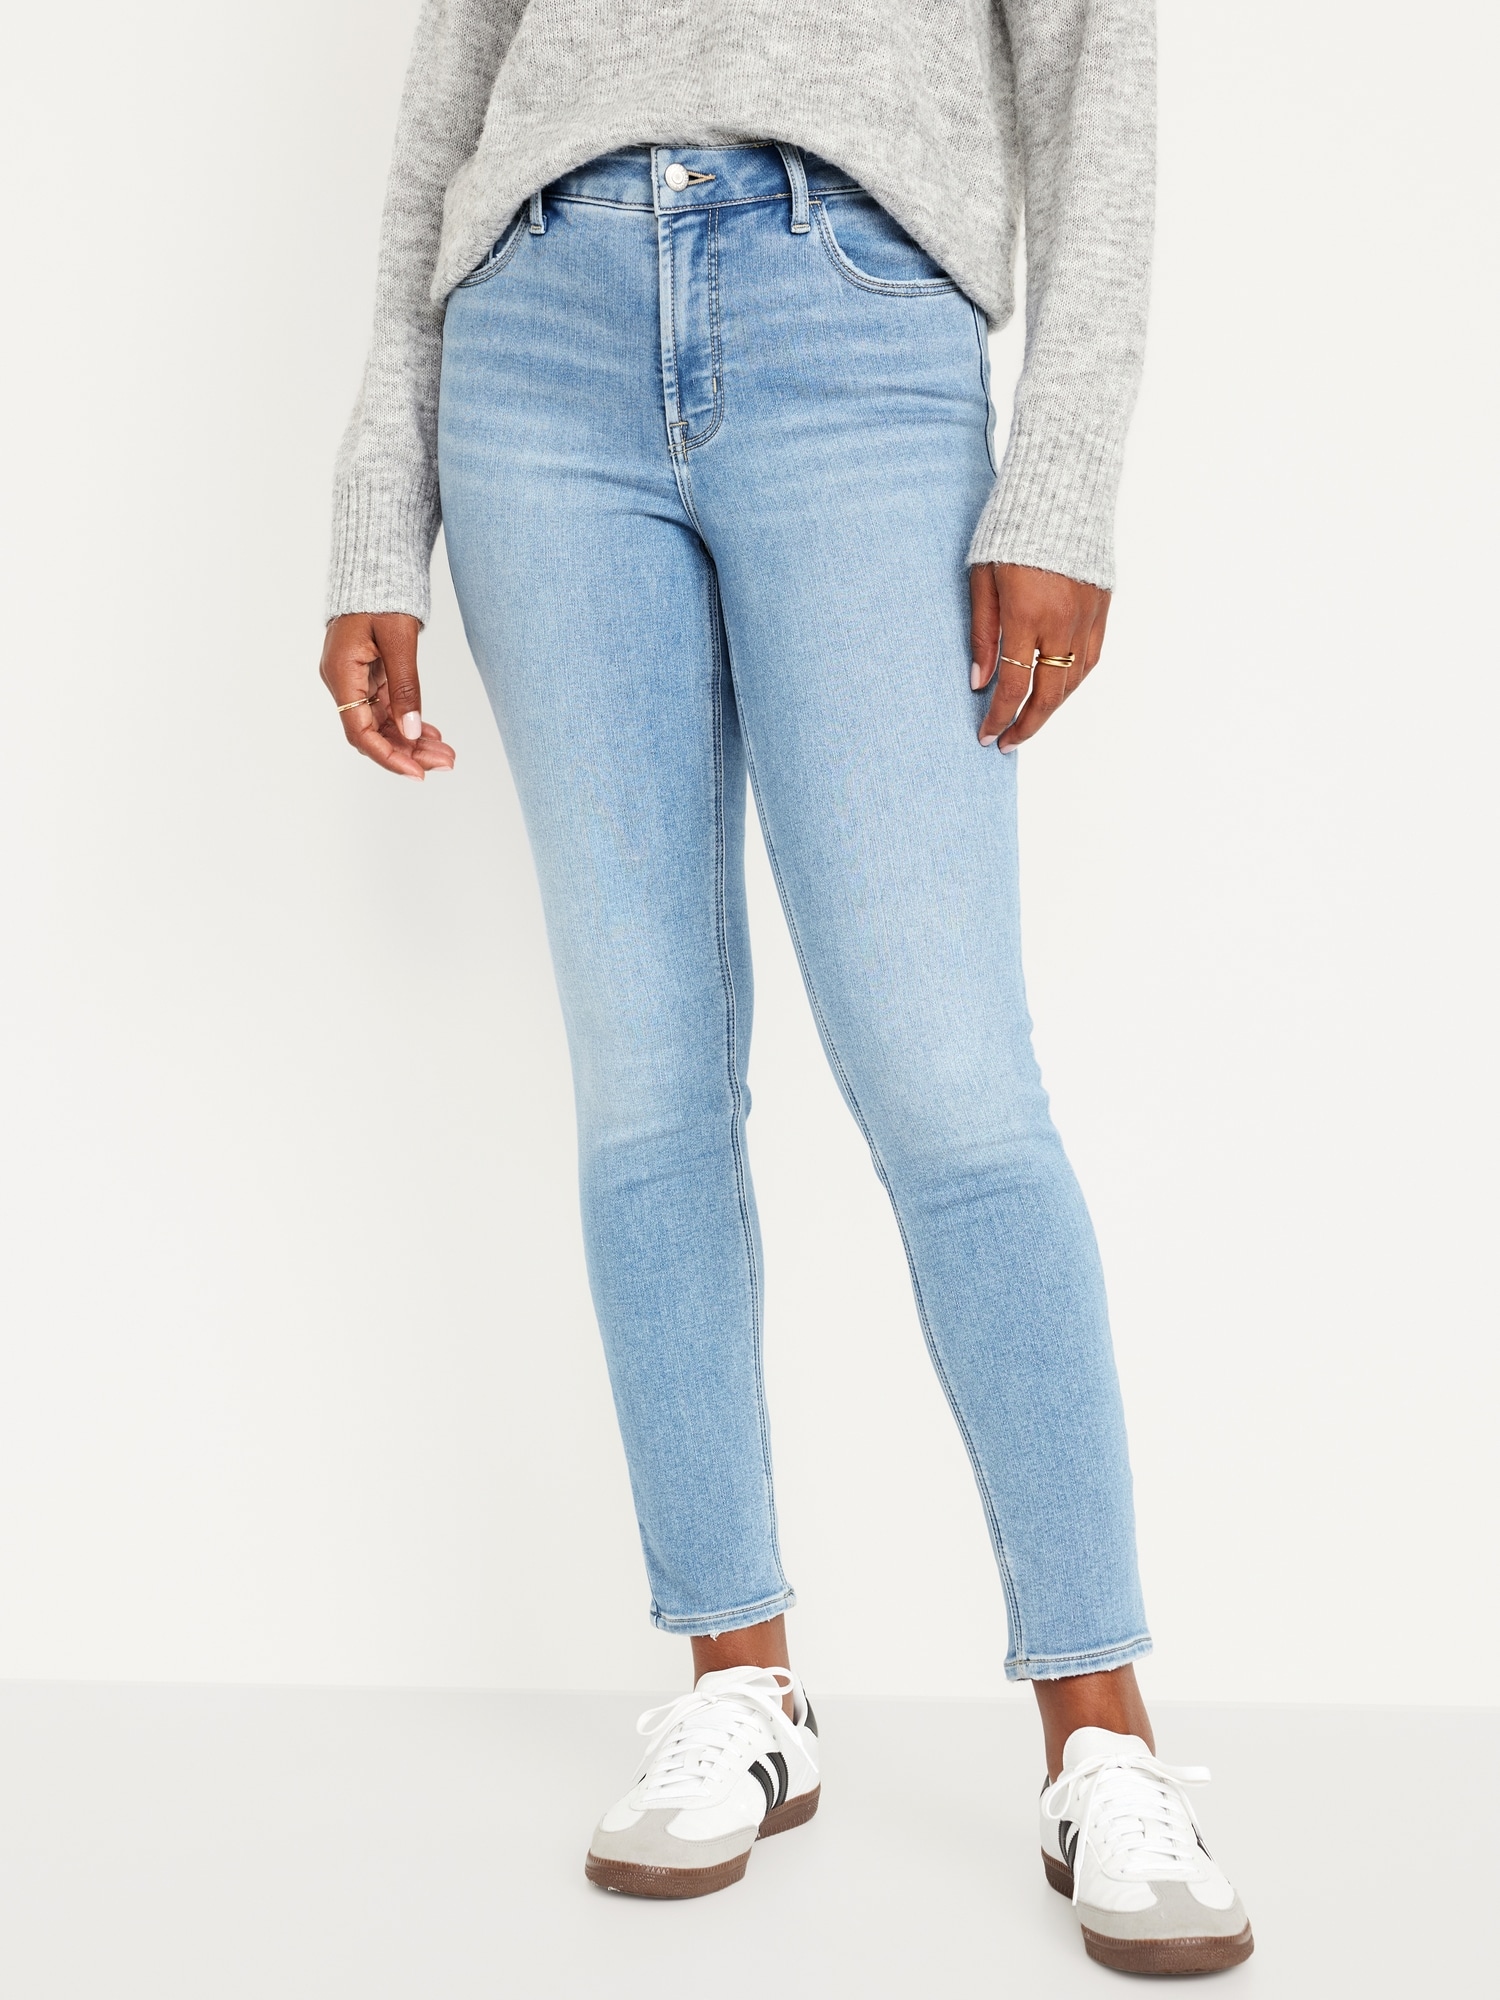 Jeans With Warm Lining